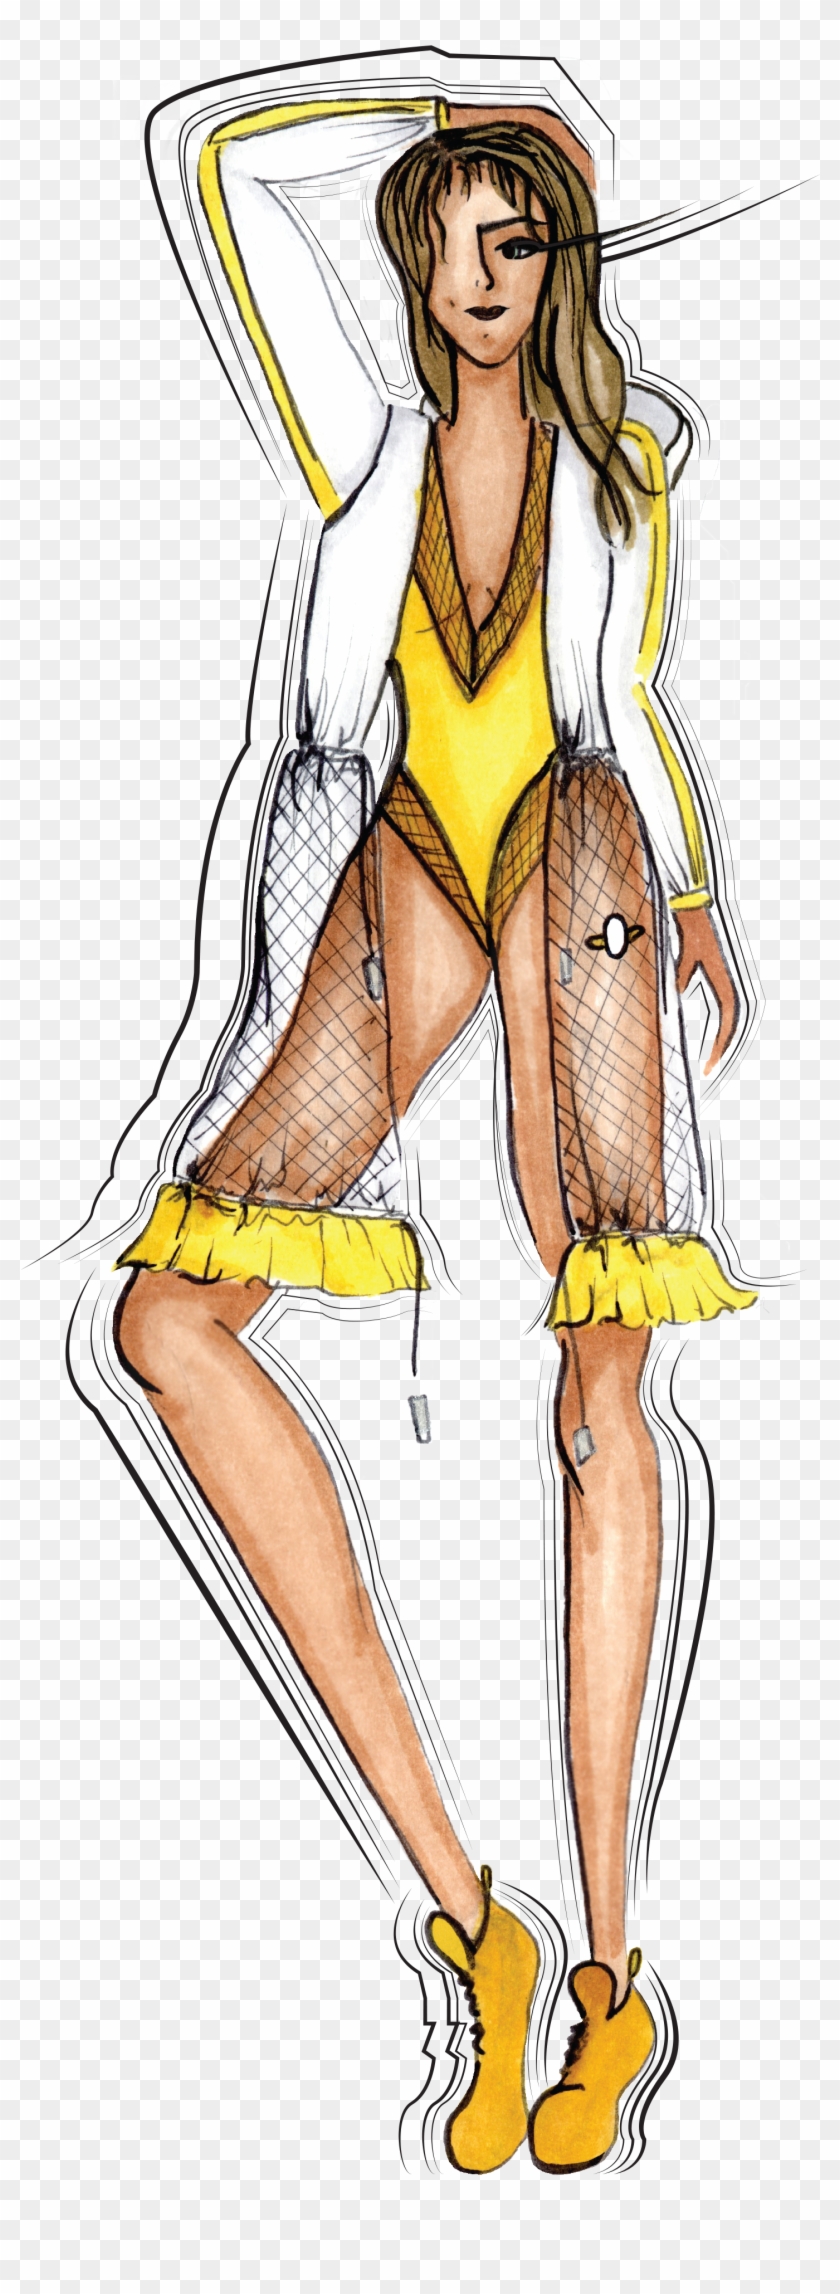 This Look Includes A Leotard With Fishnet Inserts Which - Illustration Clipart #1352483